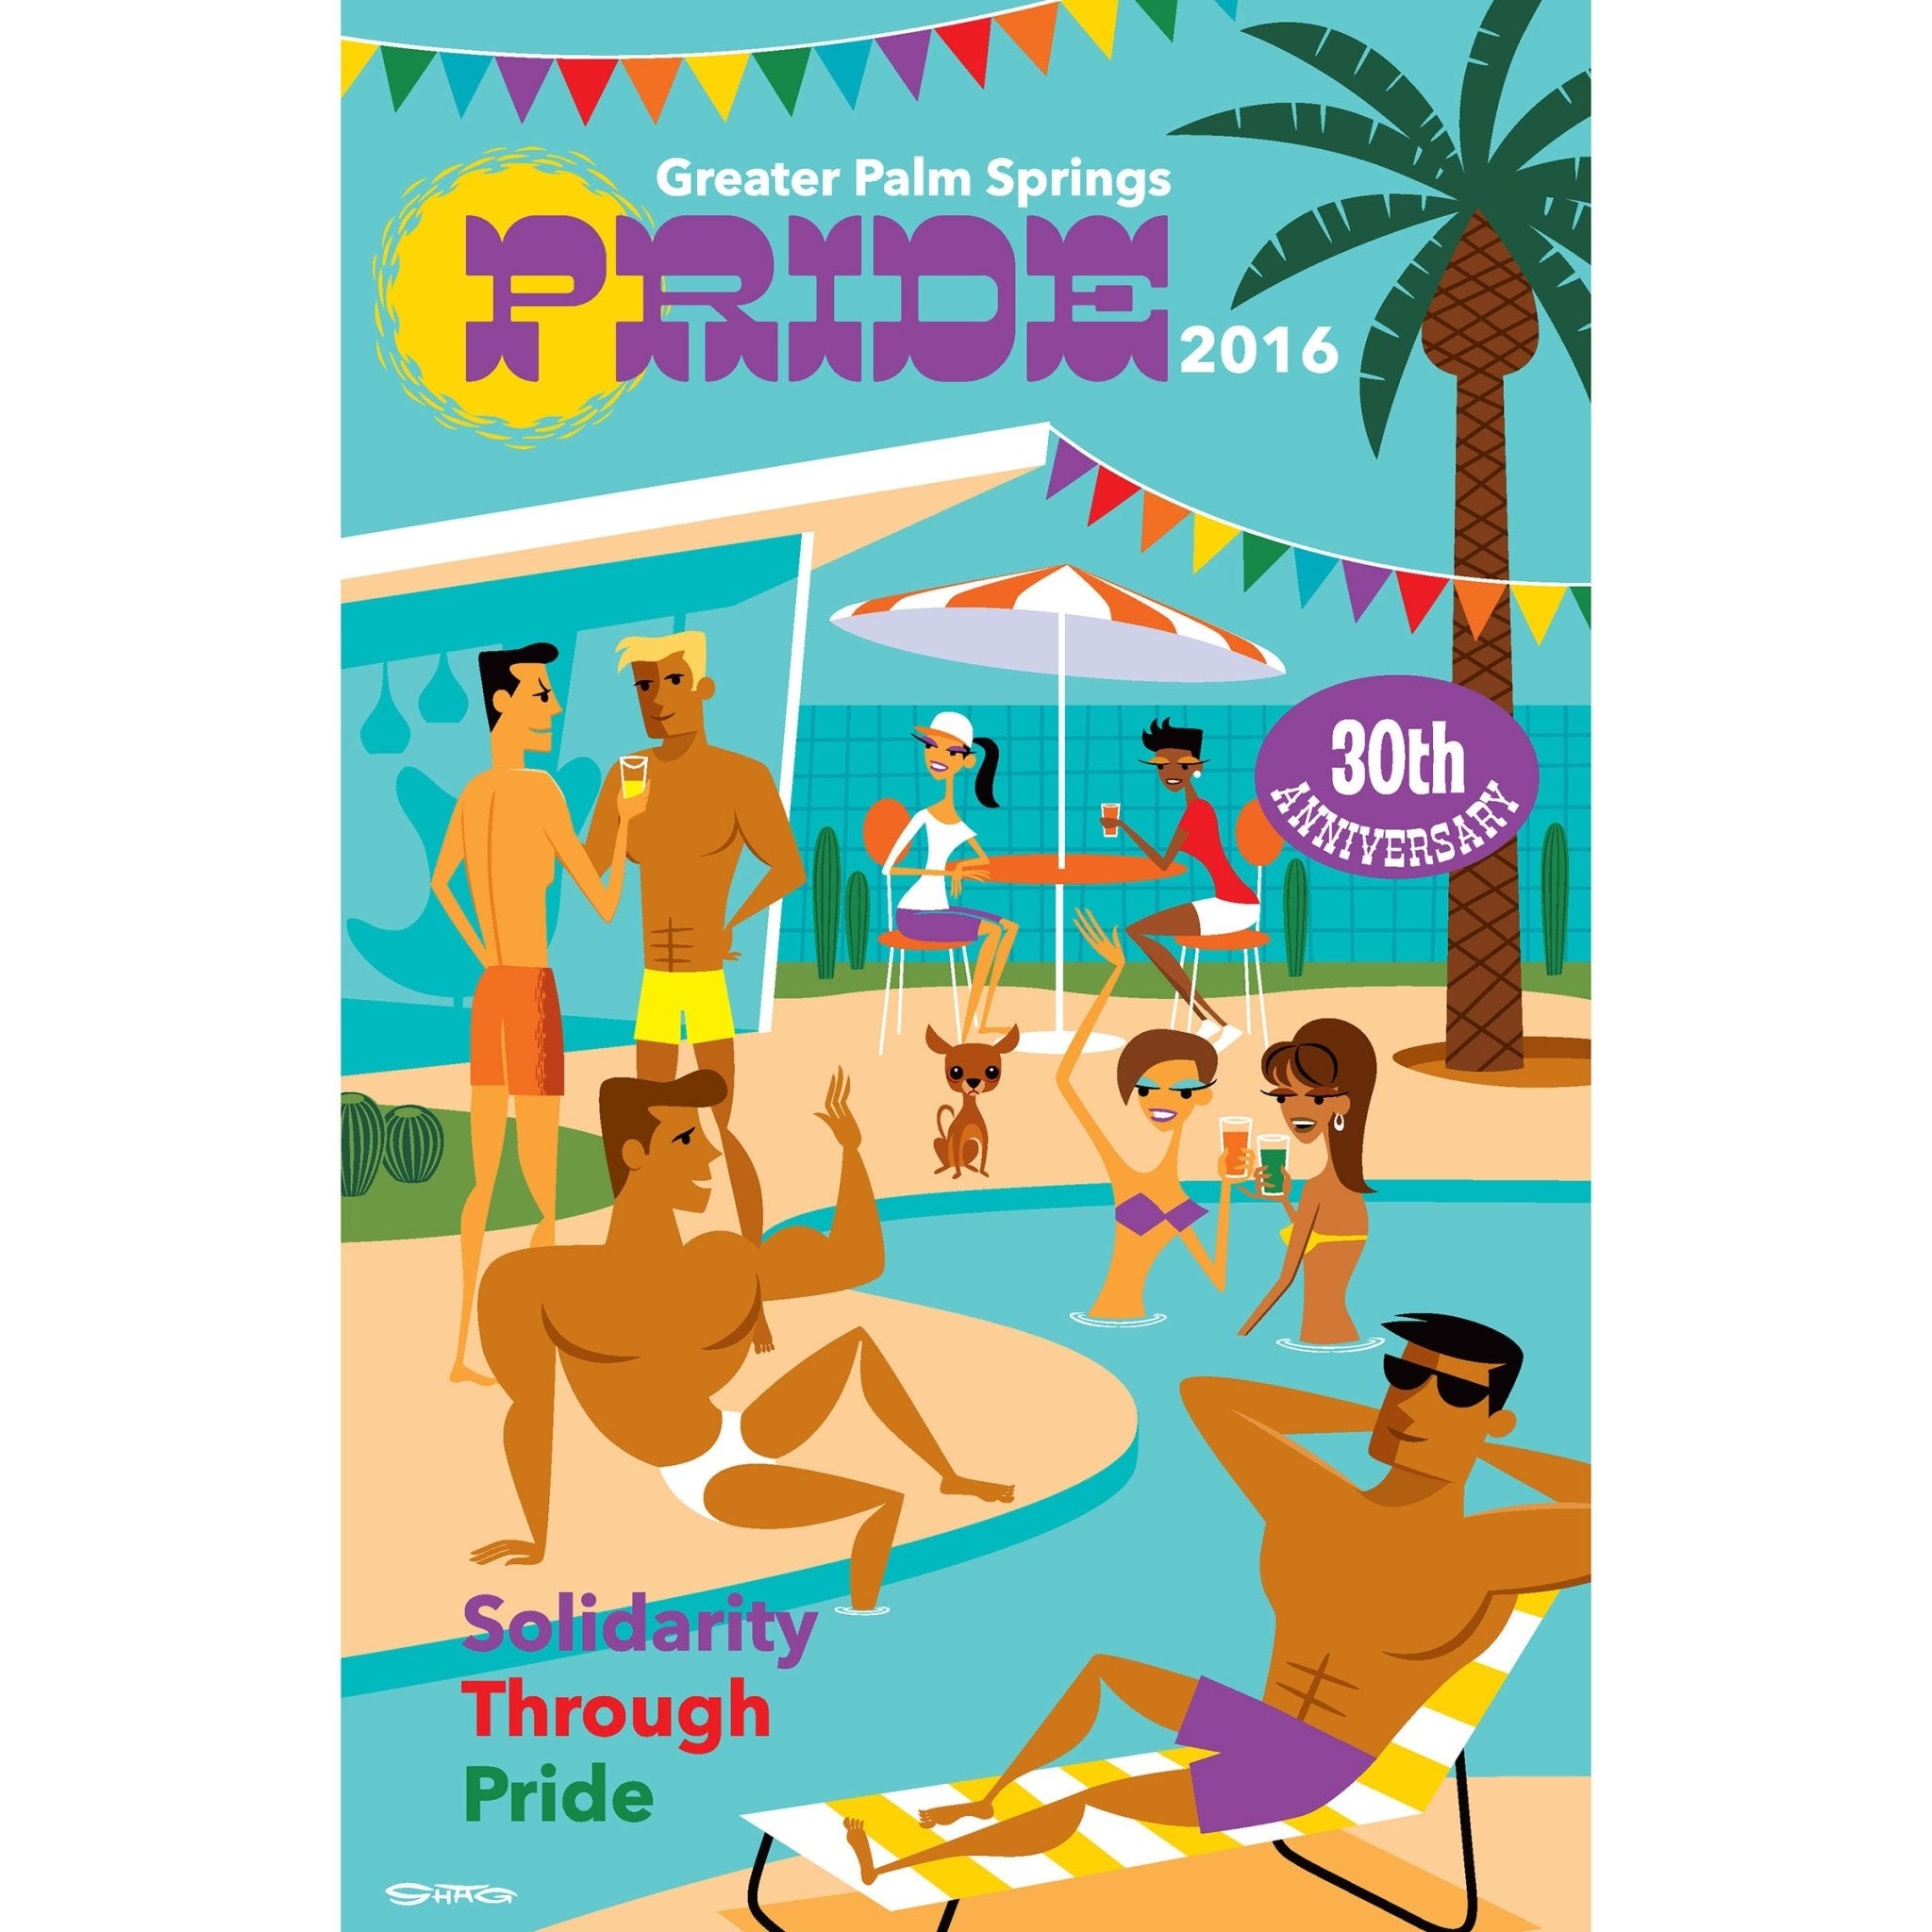 2016 Greater Palm Springs Pride Official Poster by Shag - Destination PSP